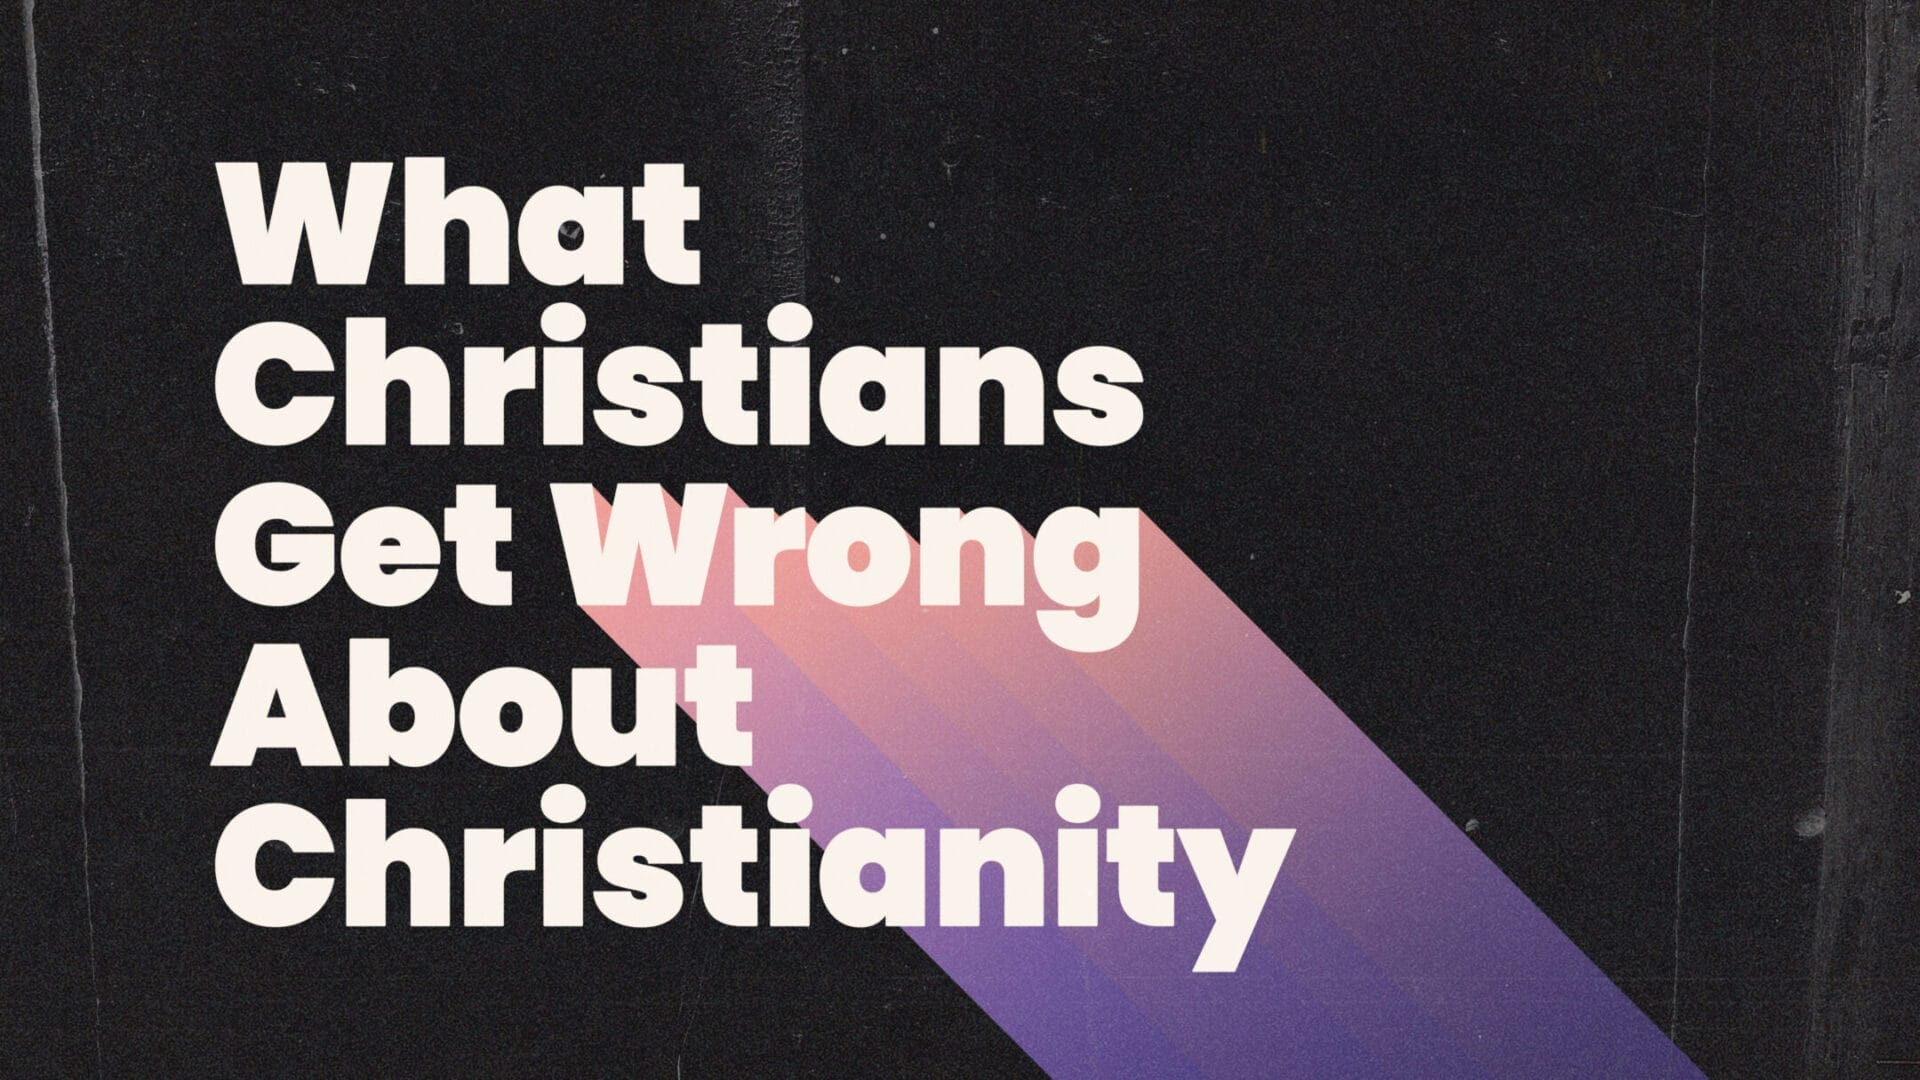 What Christians Get Wrong About Christianity